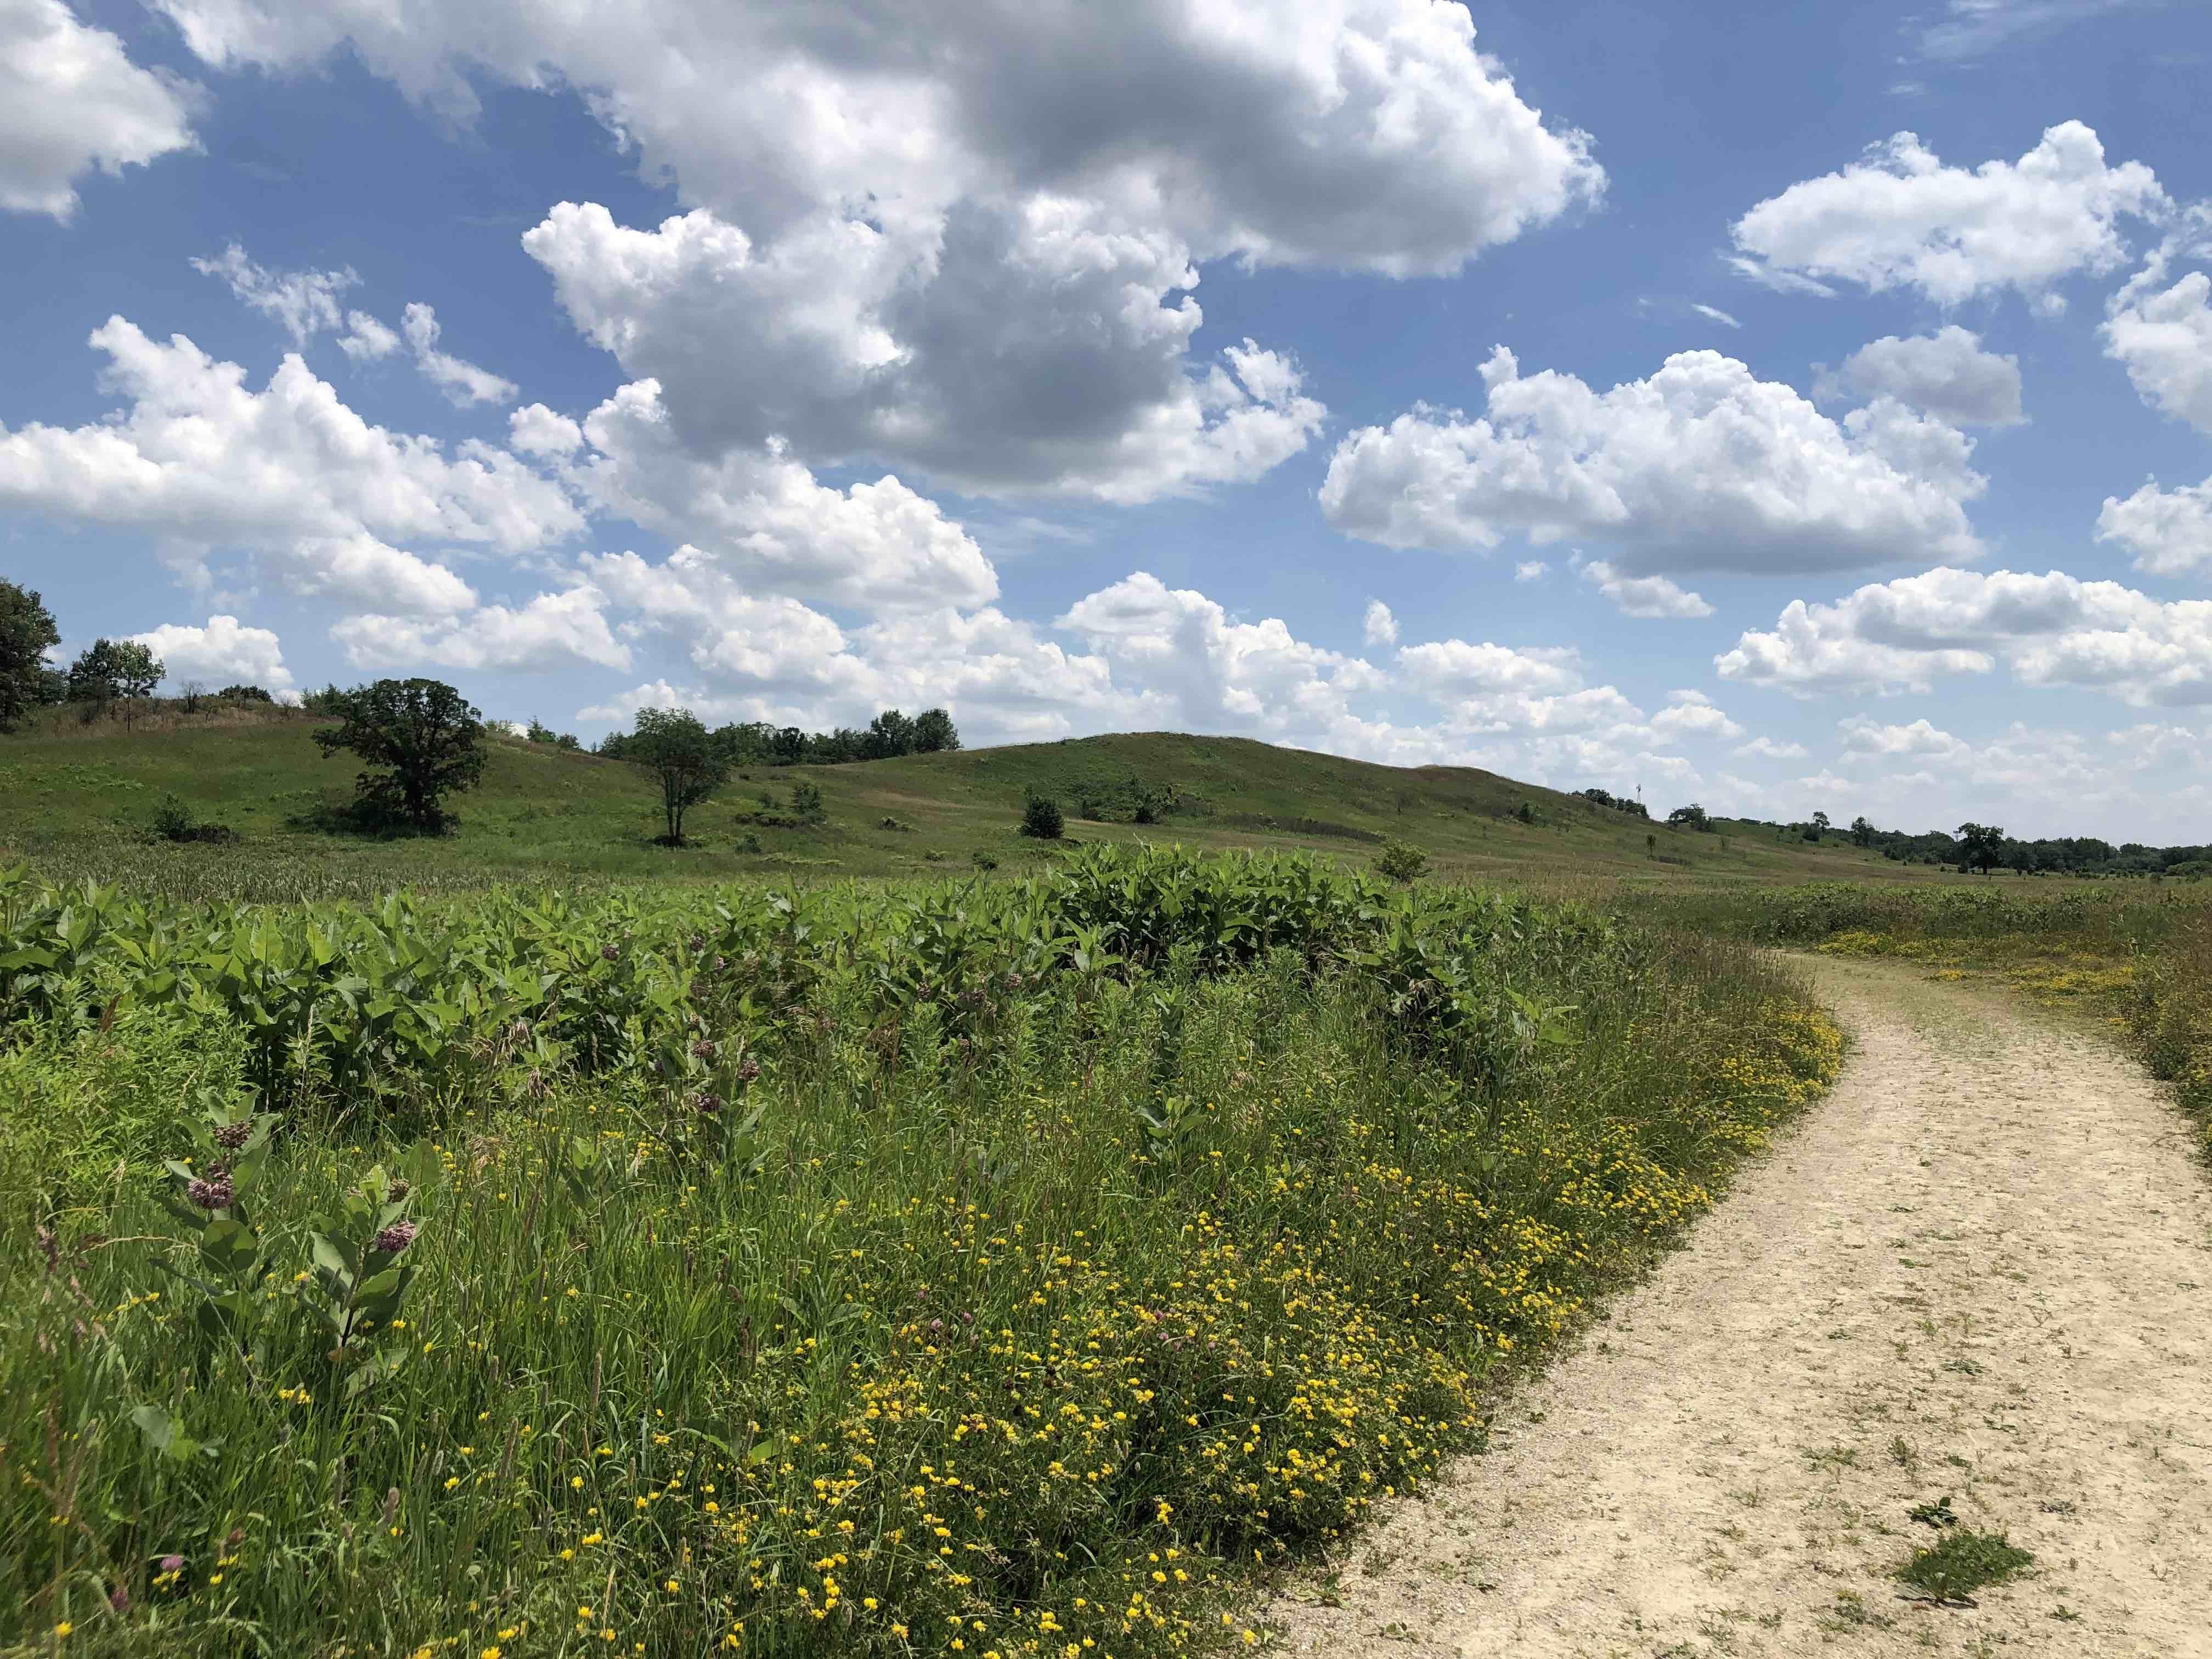 Glacial Park, with its distinctive glacial mounds, is one of the most visited sites with the Hackmatack National Wildlife Refuge. Tamarack Farms will now connect the park to the North Branch Preserve. (Patty Wetli / WTTW News)